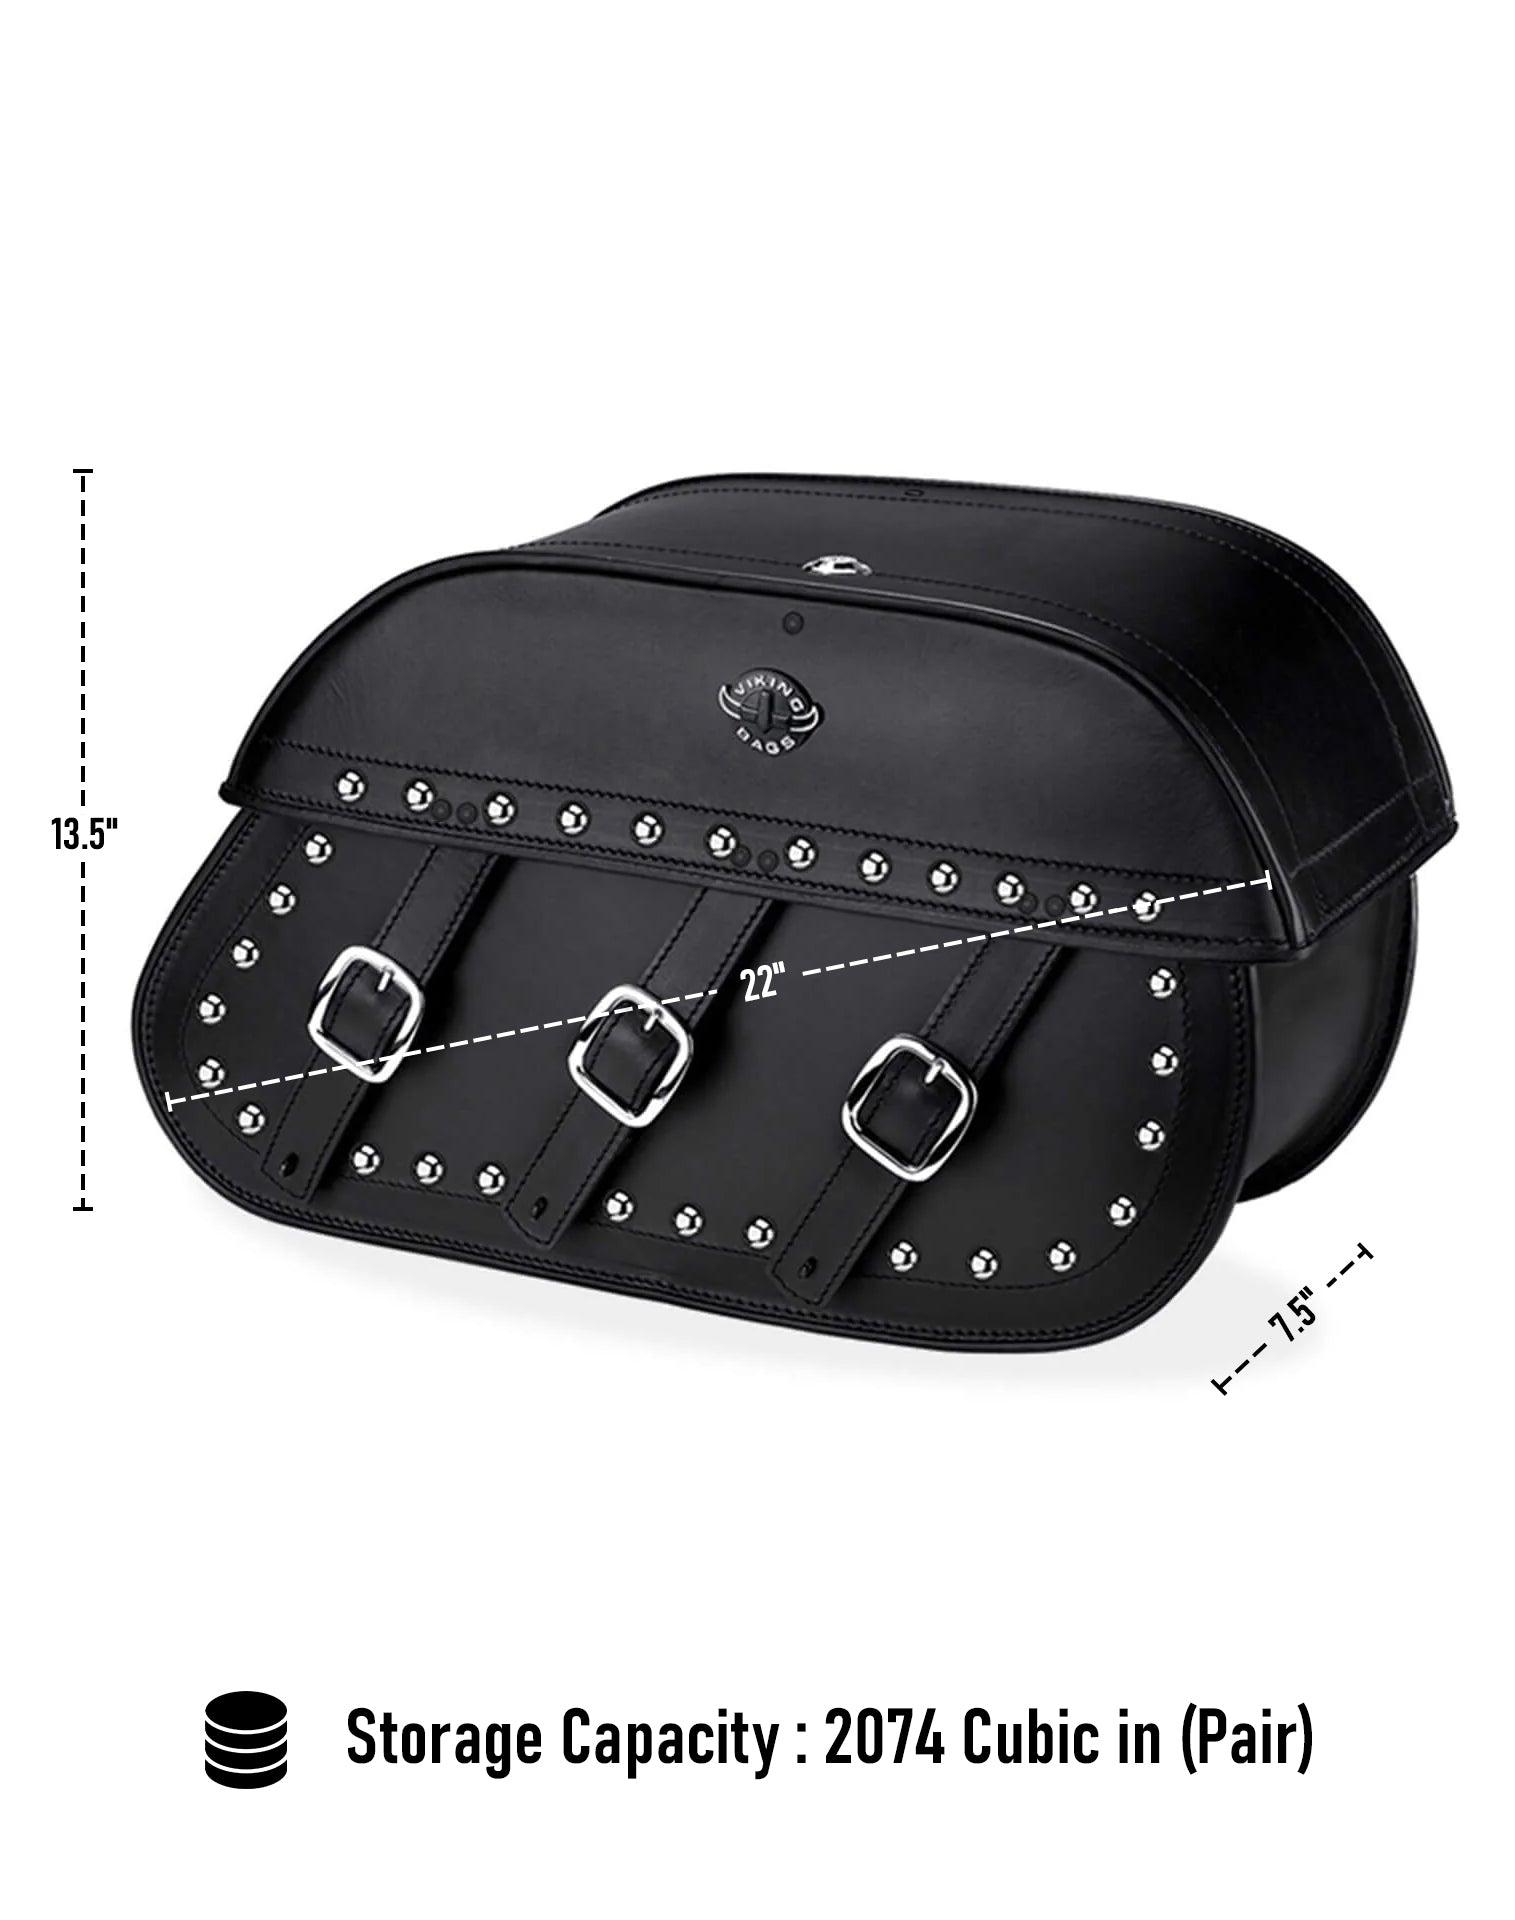 Viking Trianon Extra Large Indian Chief Standard Studded Leather Motorcycle Saddlebags Can Store Your Ridings Gears